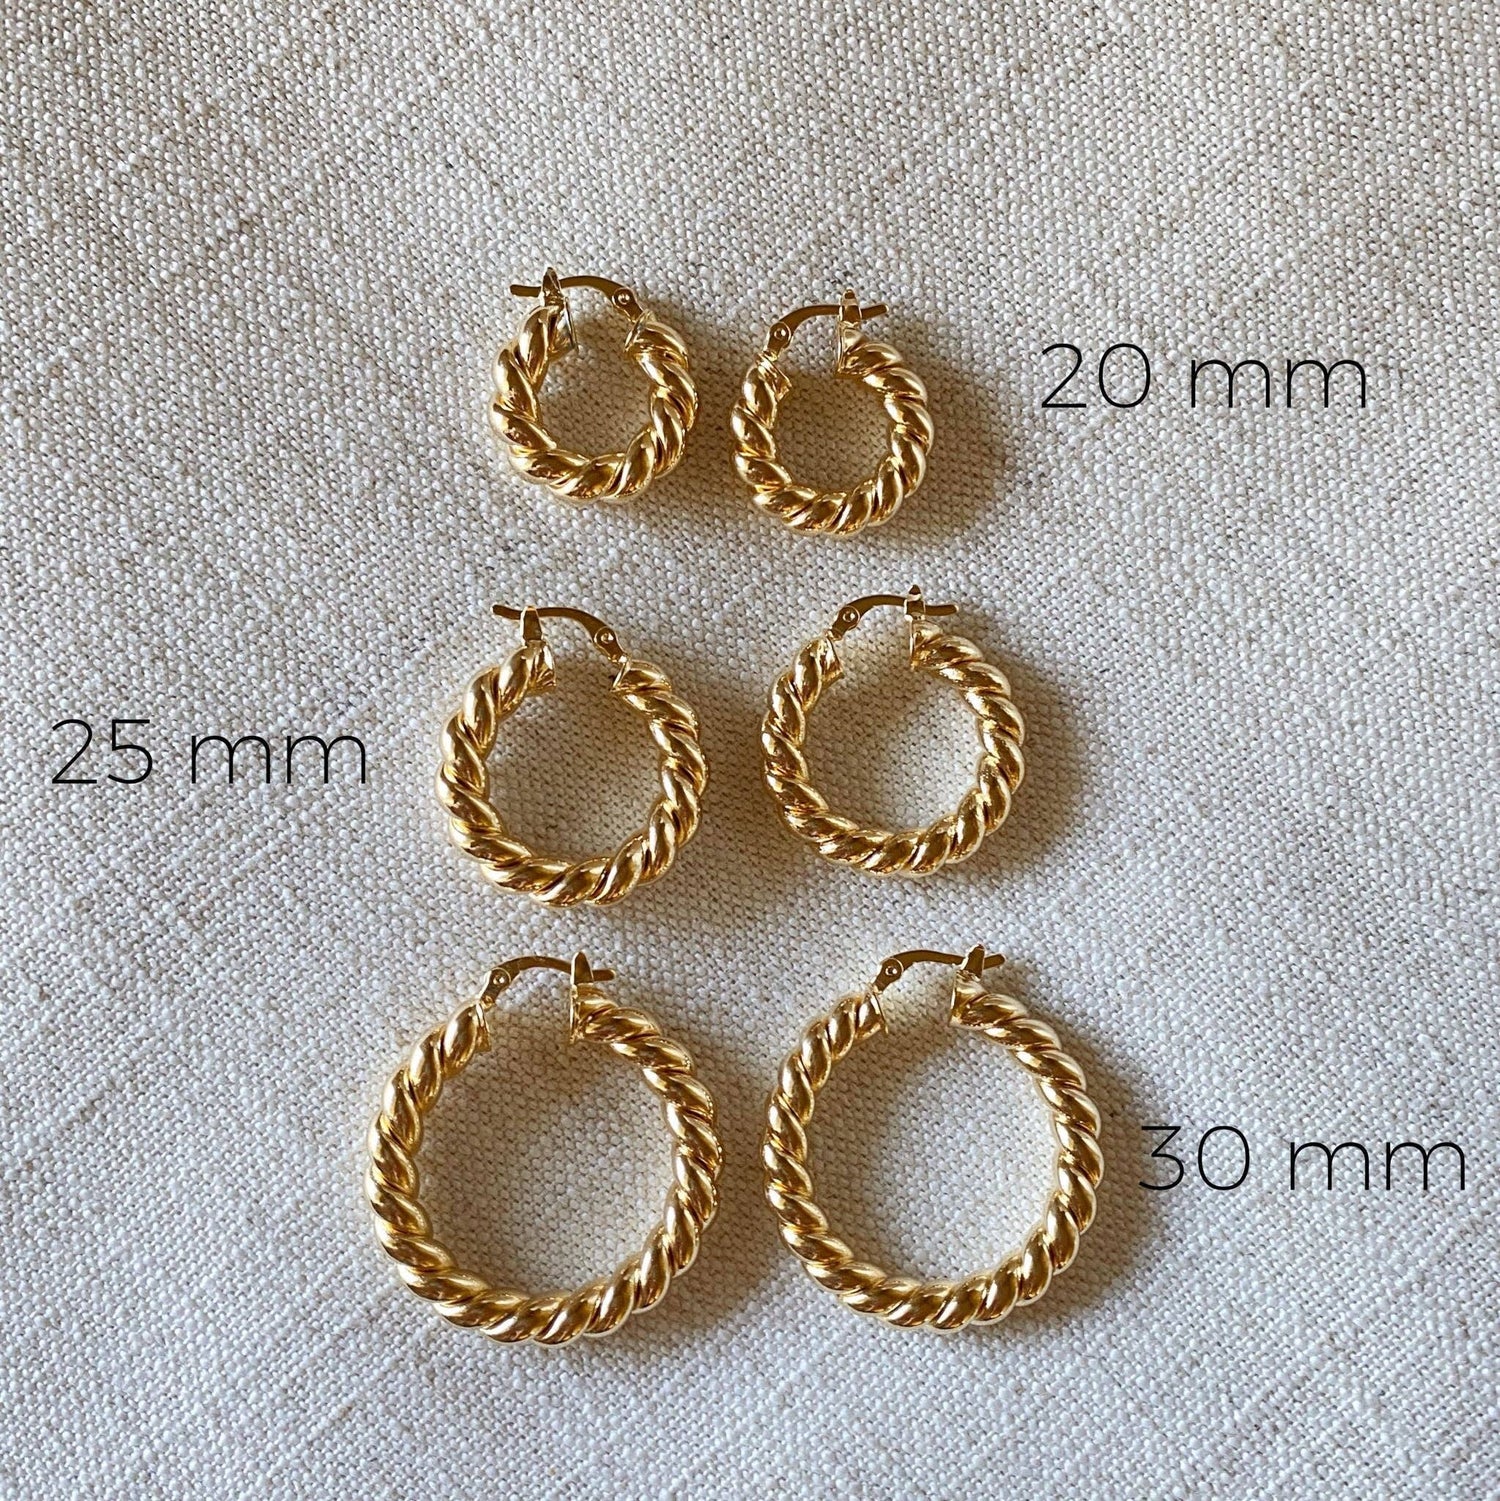 18k Gold Filled Twisted Tube Hoop Earrings - The Croissant Hoops: 20mm